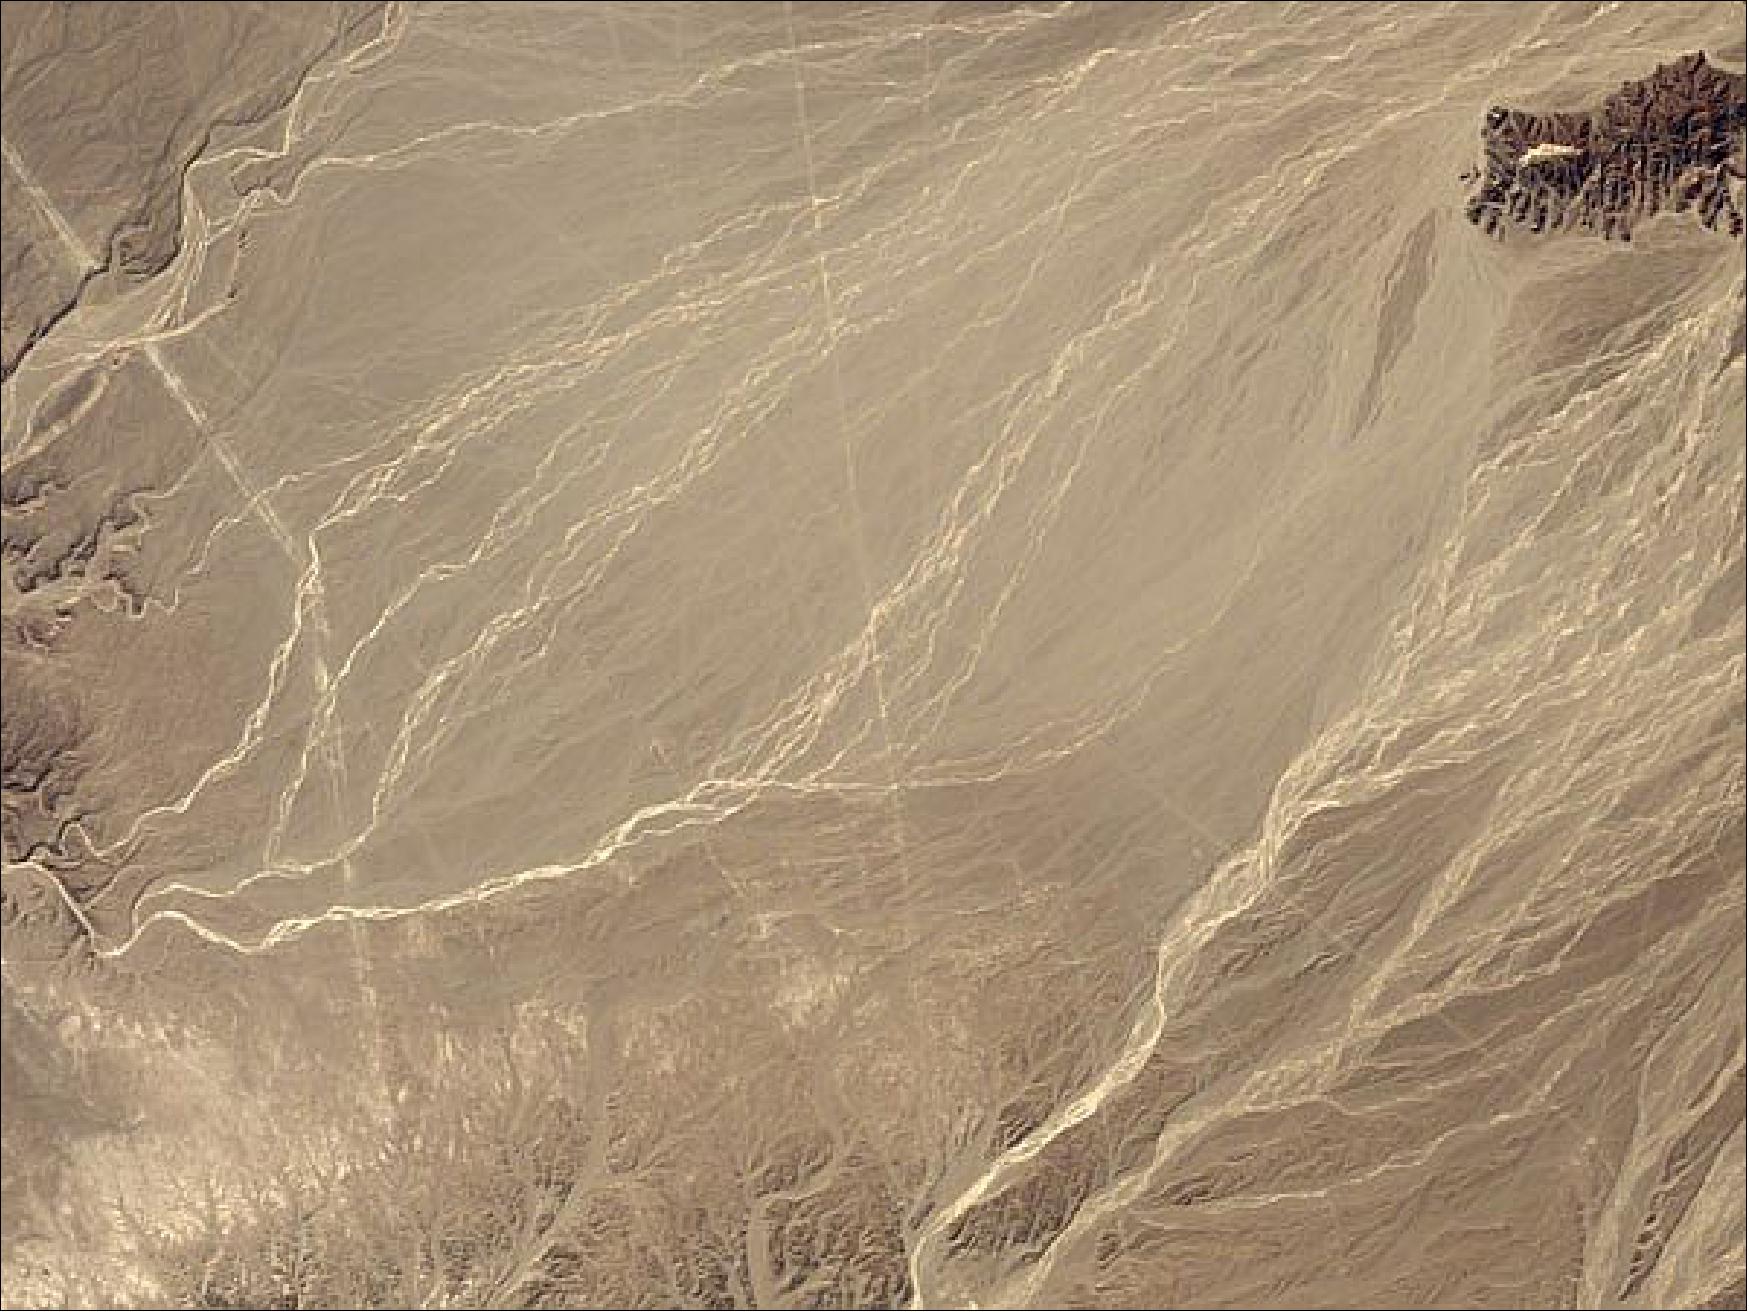 Figure 41: This Flock 1 image, acquired on 8 June 2016, shows the enormous Nazca Lines etched into the arid coastal desert in southern Peru (image credit: Planet Labs) 76)